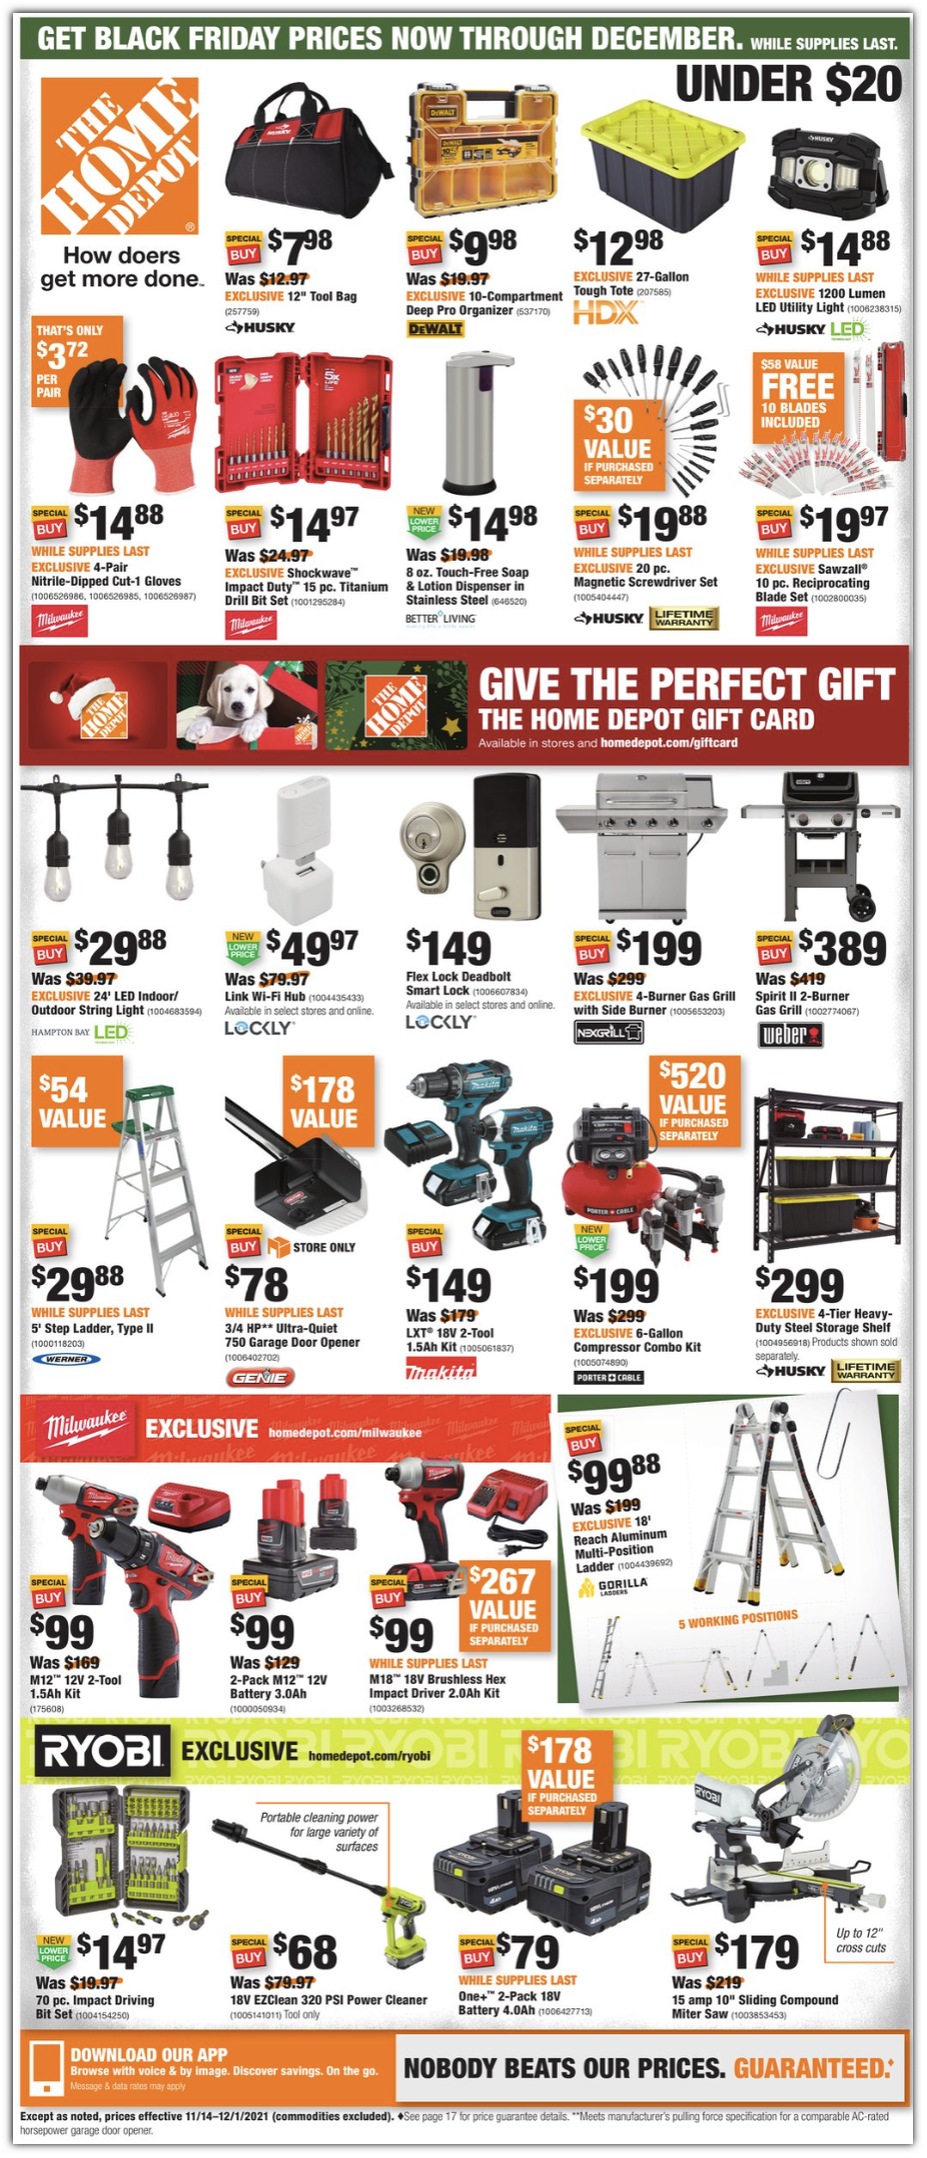 Under $20 Gifts / Grills / Power Tools